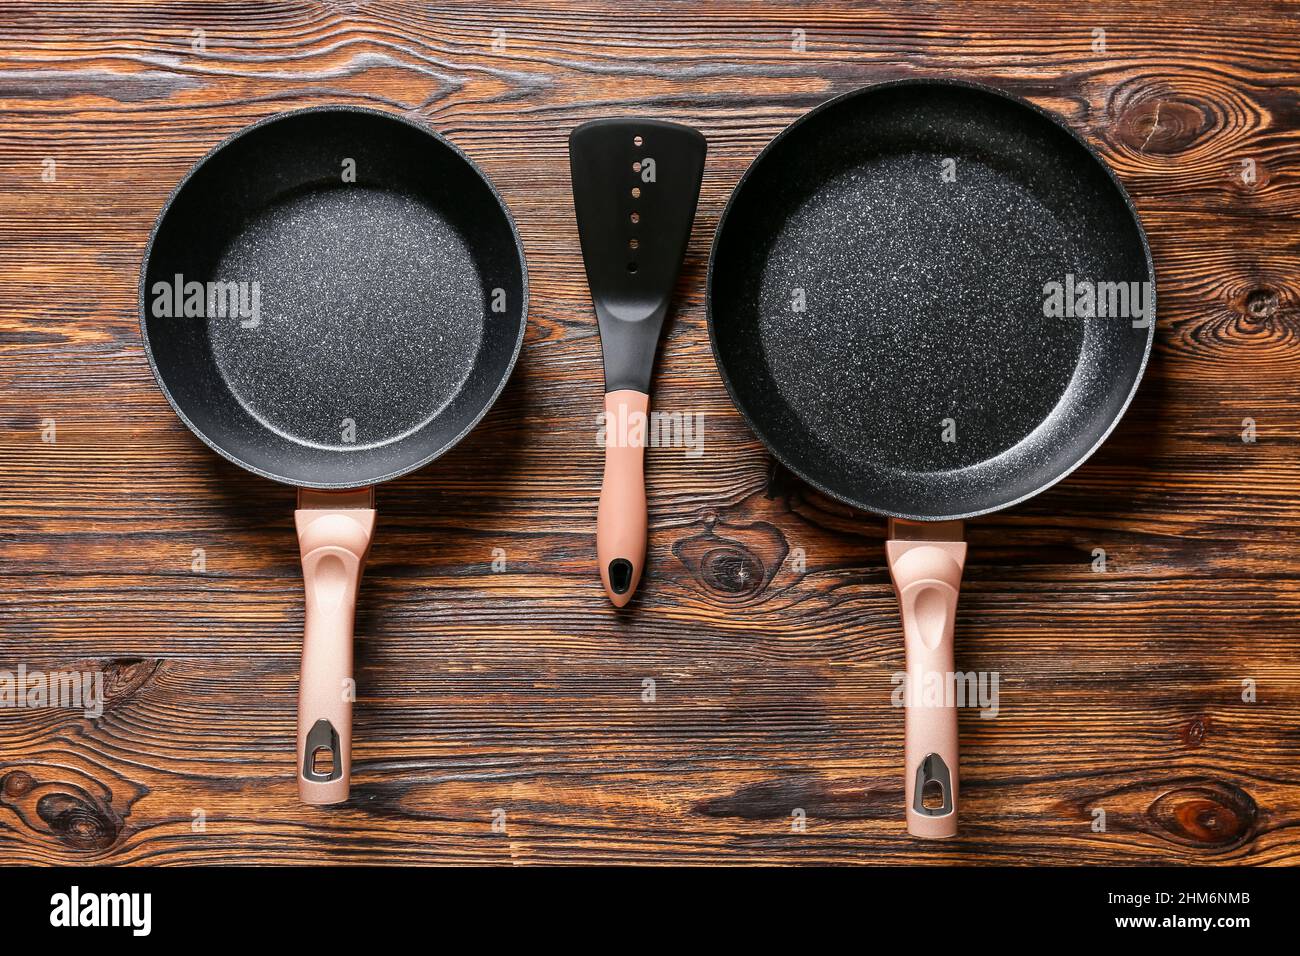 Frying pan and spatula Stock Photo by ©antpkr 62098349